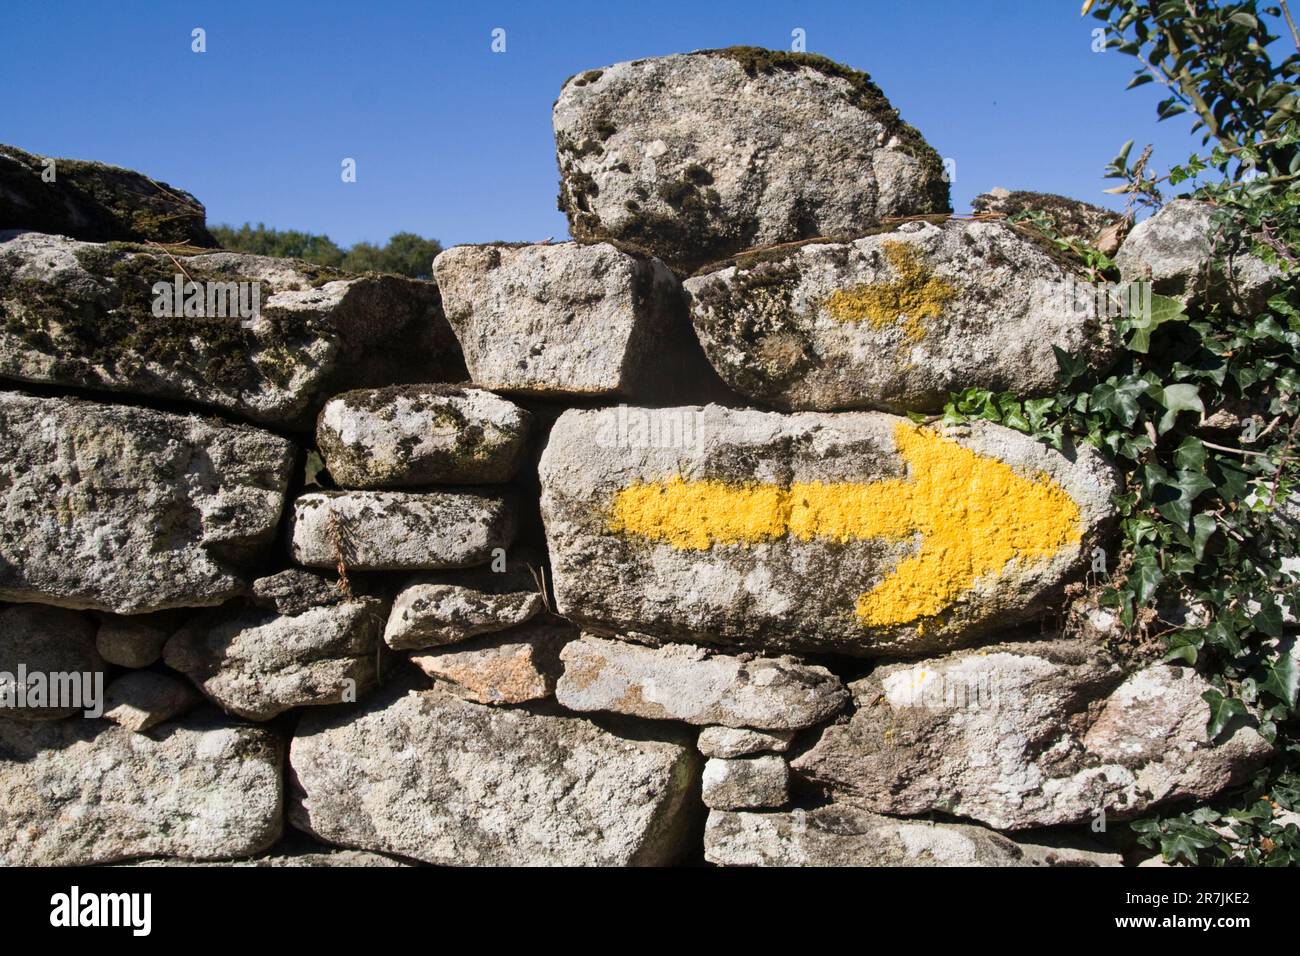 A yellow arrow on an old stone wall points the way to pilgrims walking the Camino de Santiago in Galicia, Spain. Stock Photo